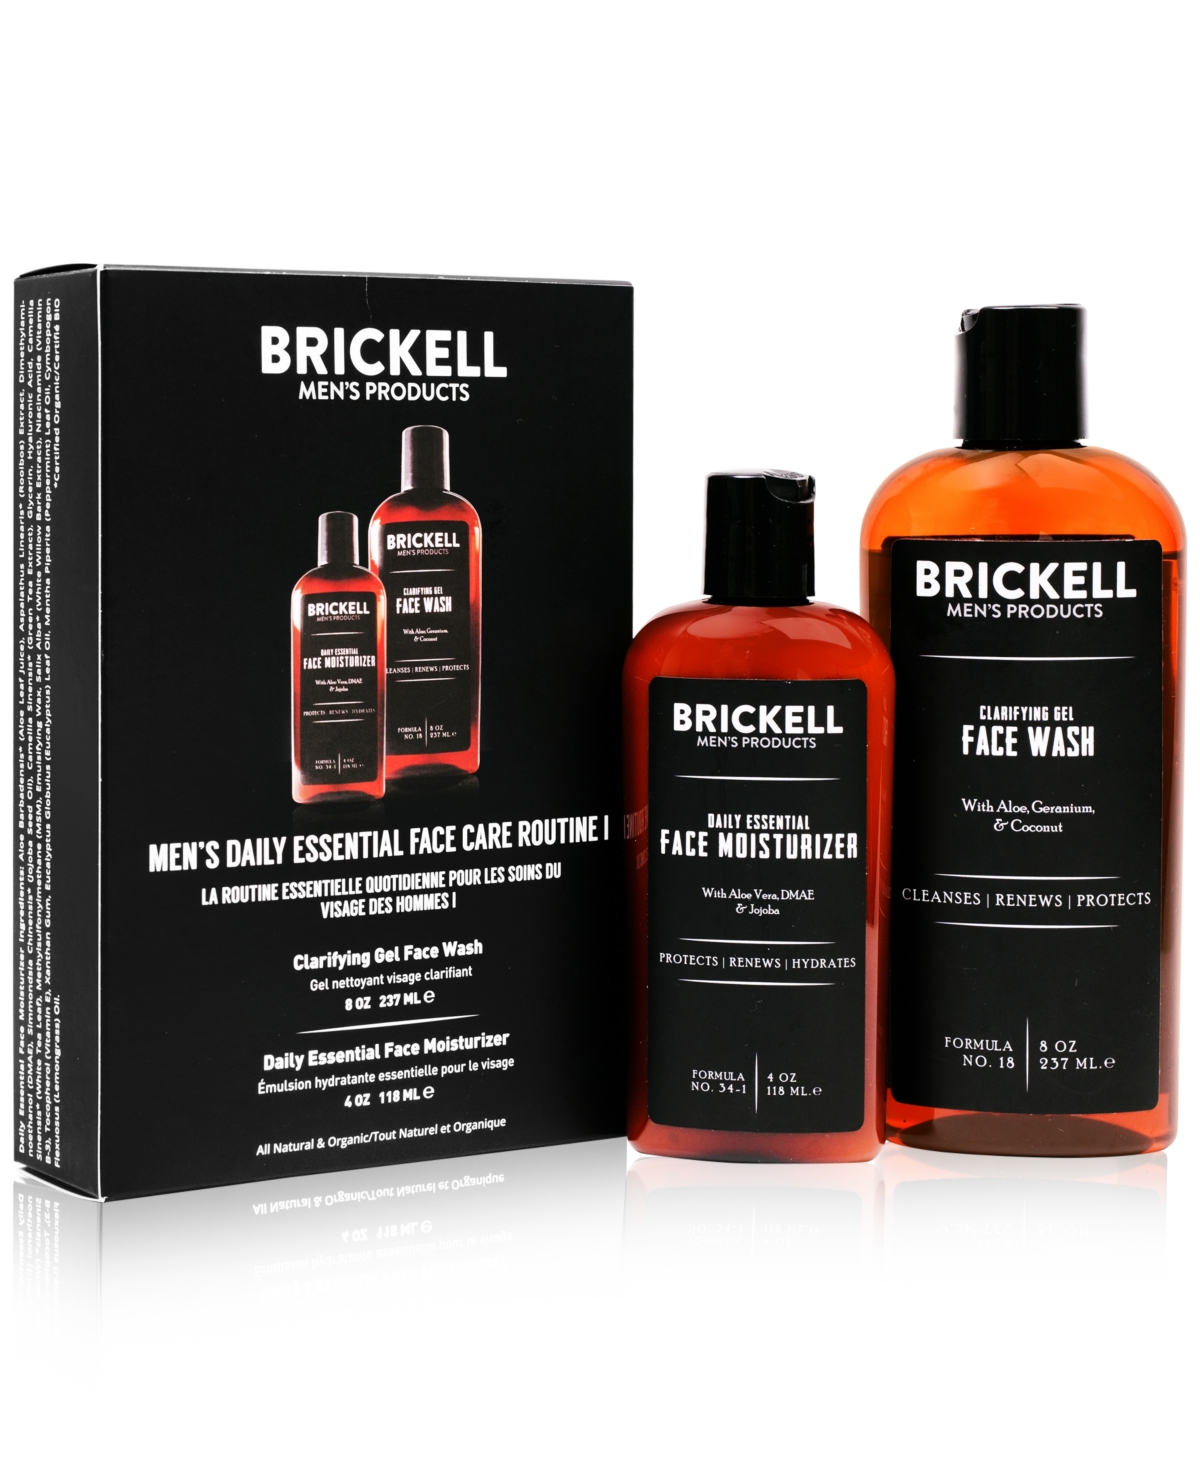 Brickell Men's Products 2-Pc. Men's Daily Essential Face Care Set - Routine I